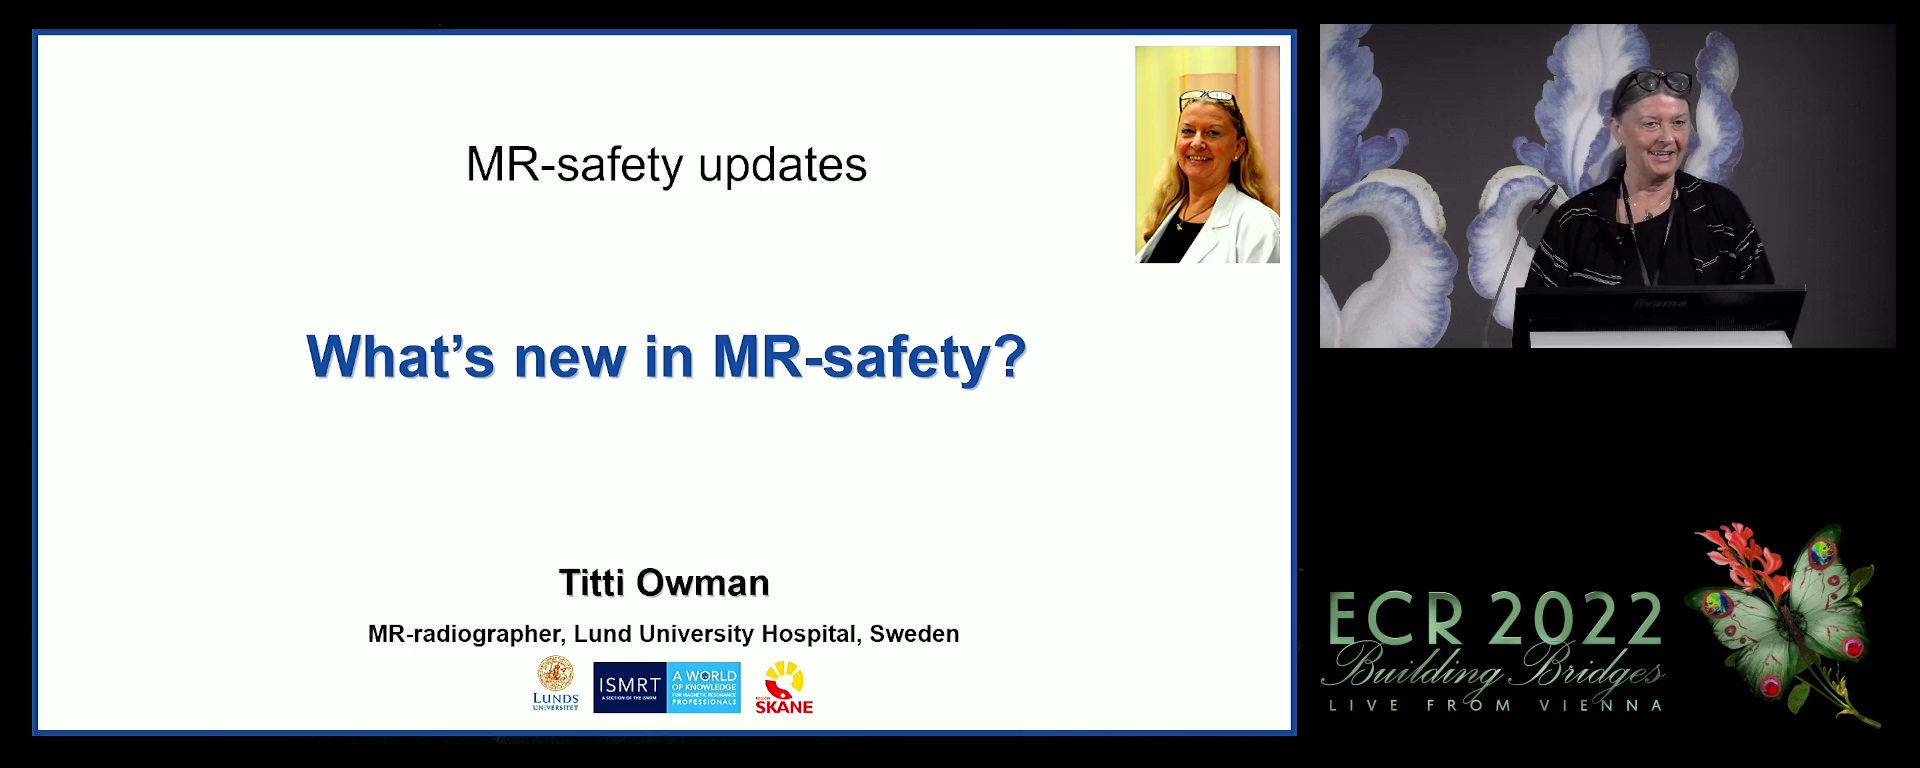 What is new in MR safety?